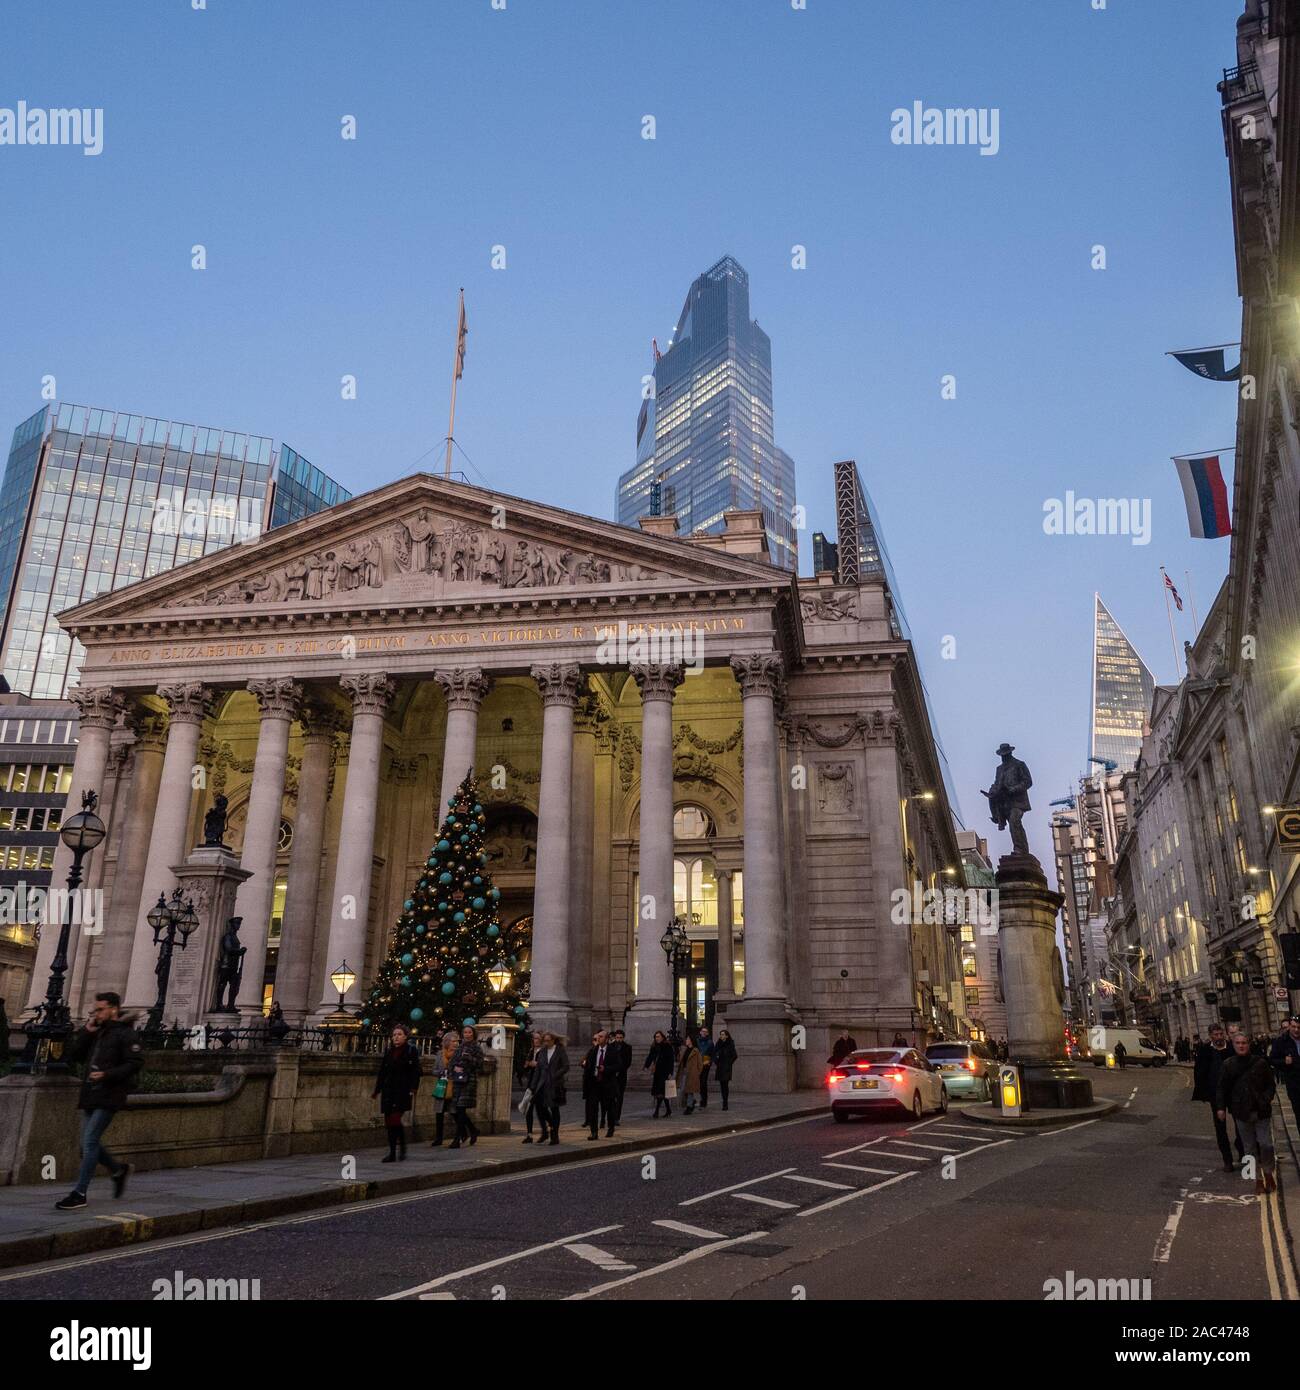 The Royal Exchange, now used as a luxury shopping centre, nr Bank of England, London Stock Photo